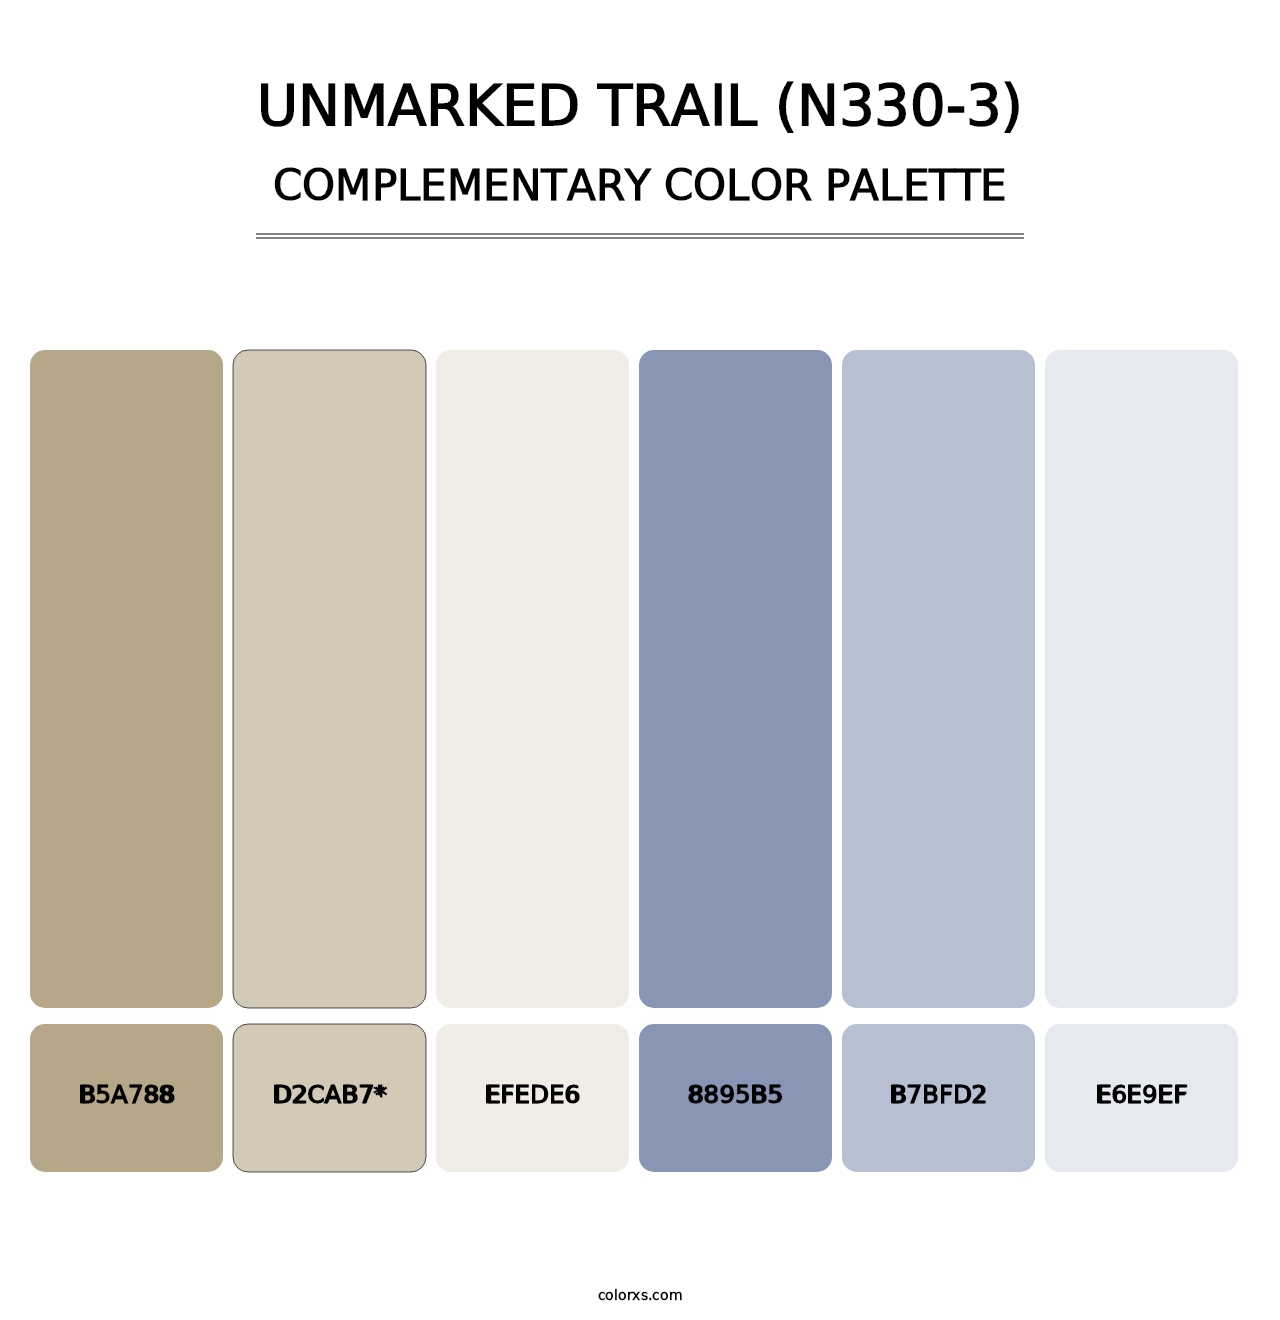 Unmarked Trail (N330-3) - Complementary Color Palette